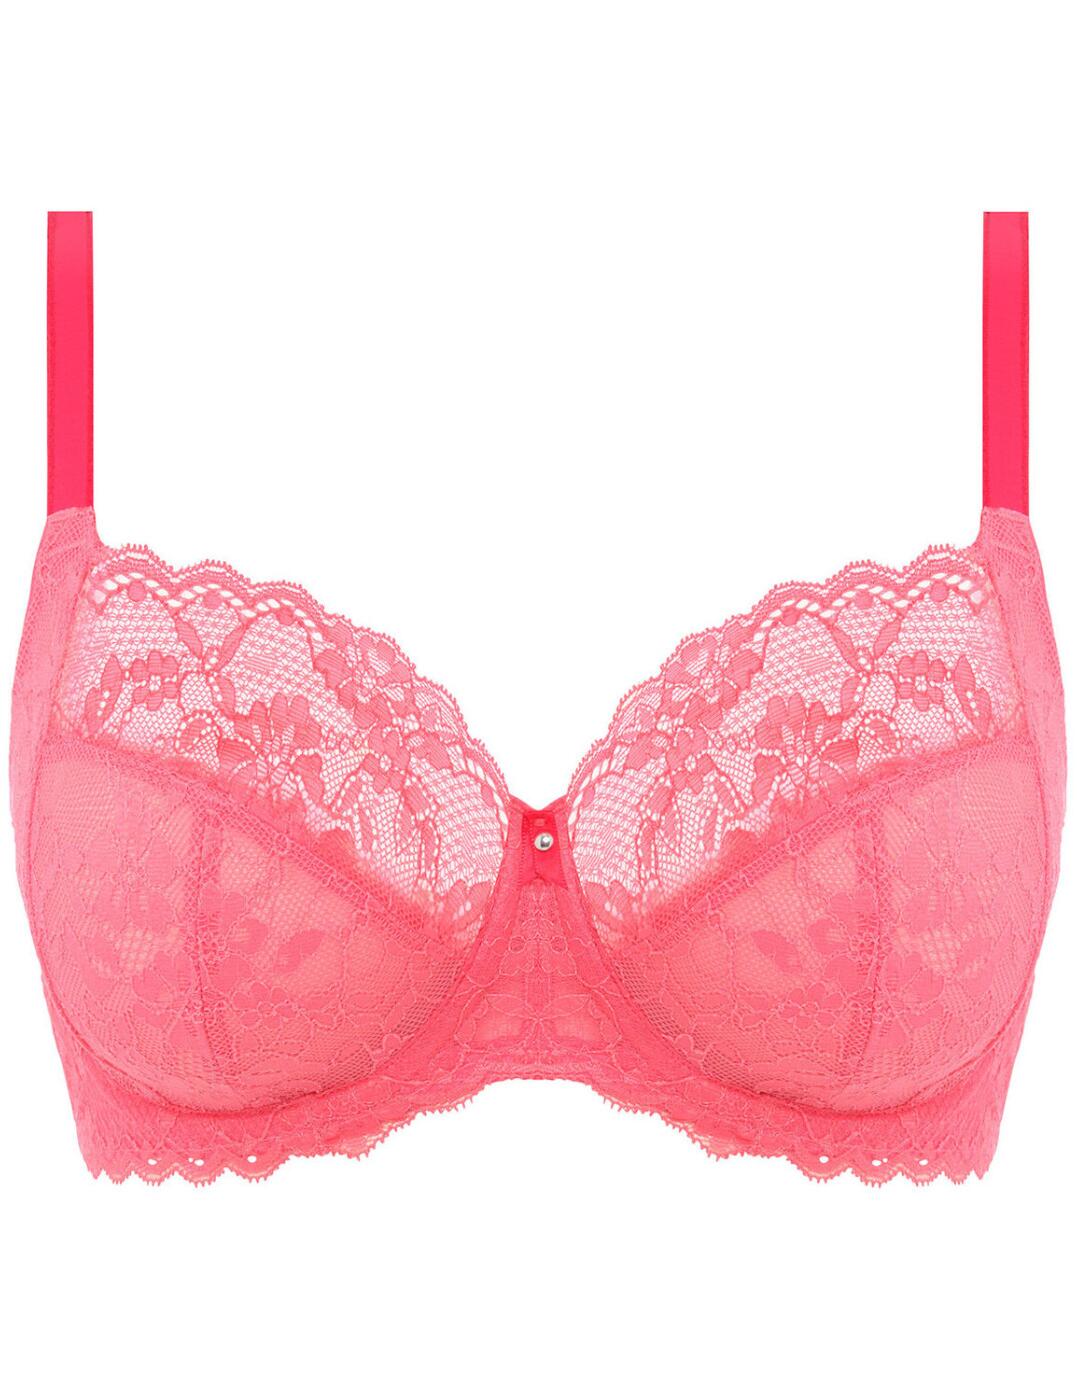 Freya Offbeat Underwired Side Support Bra 5451 Non-Padded Womens Lace Bras